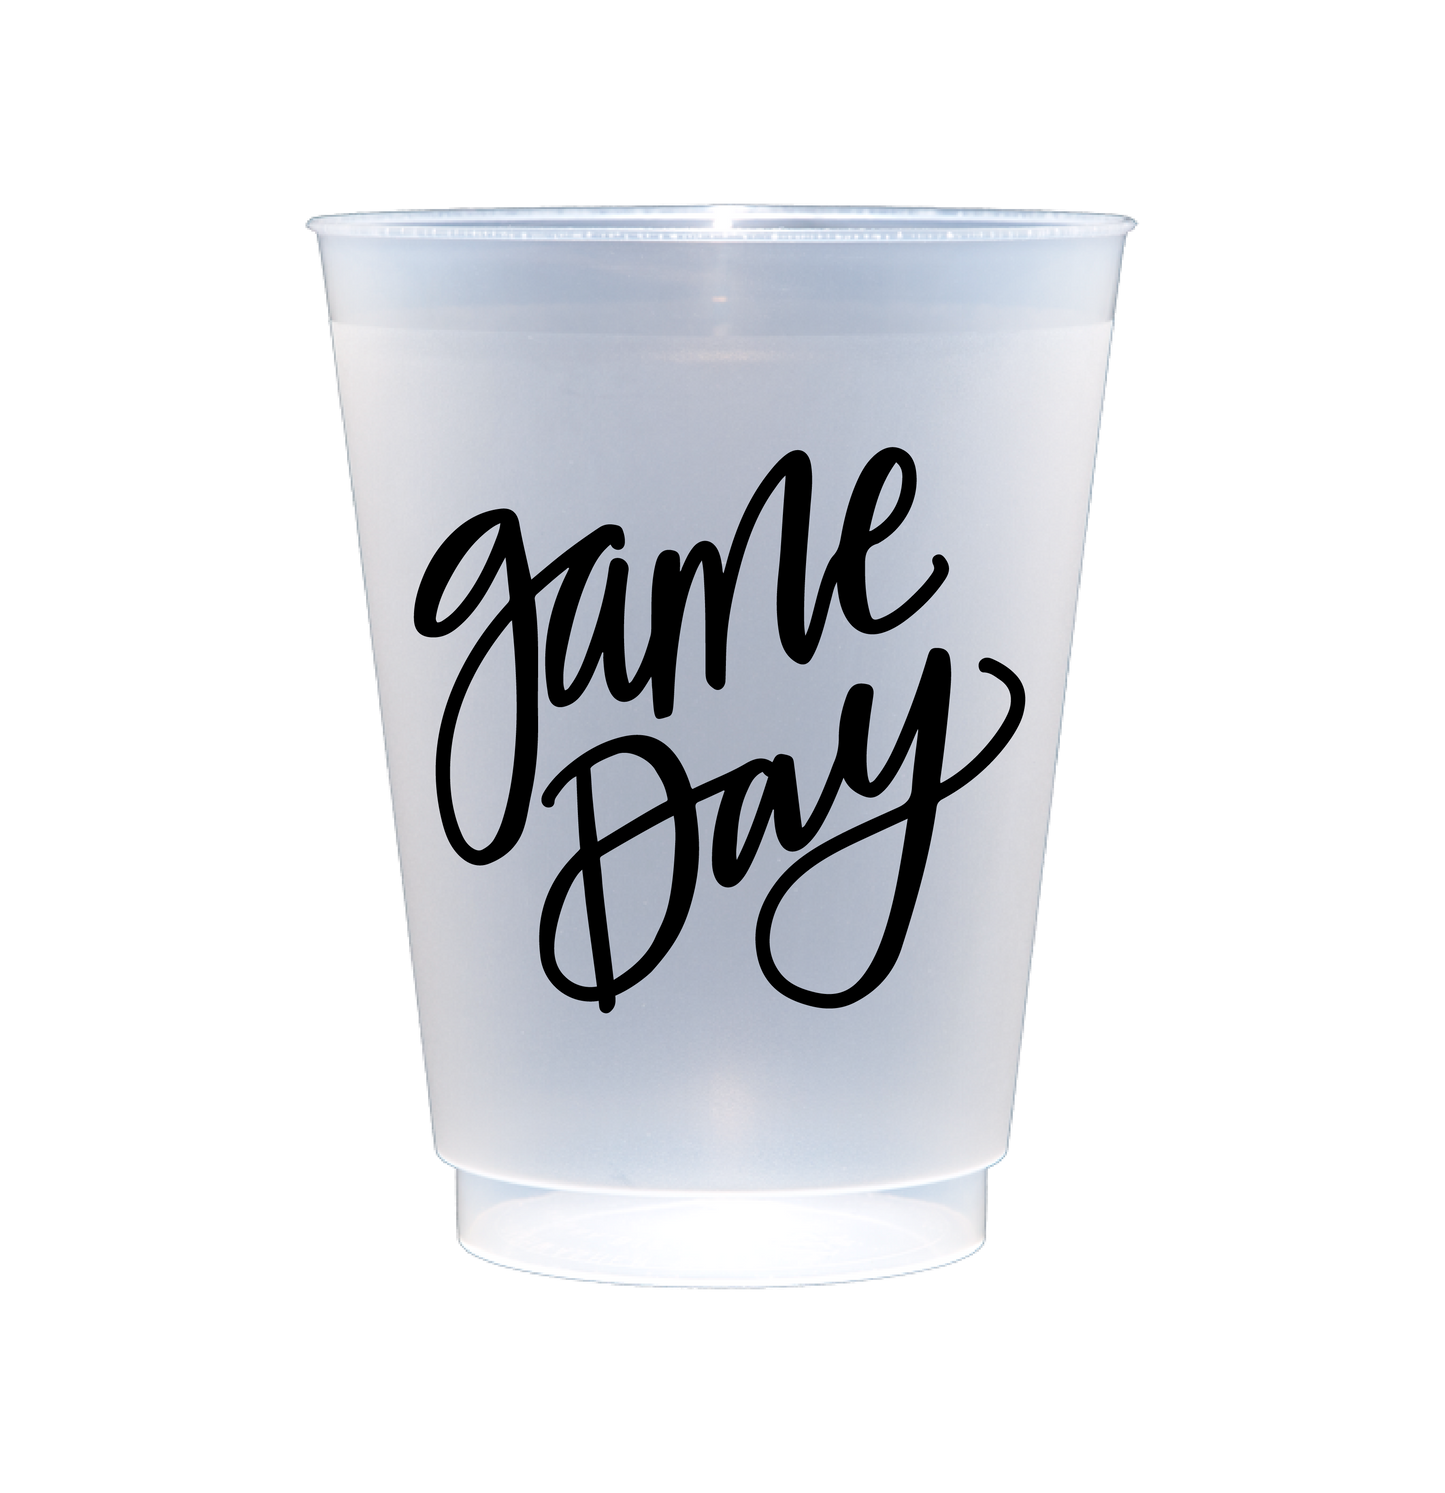 Game Day Party Cups